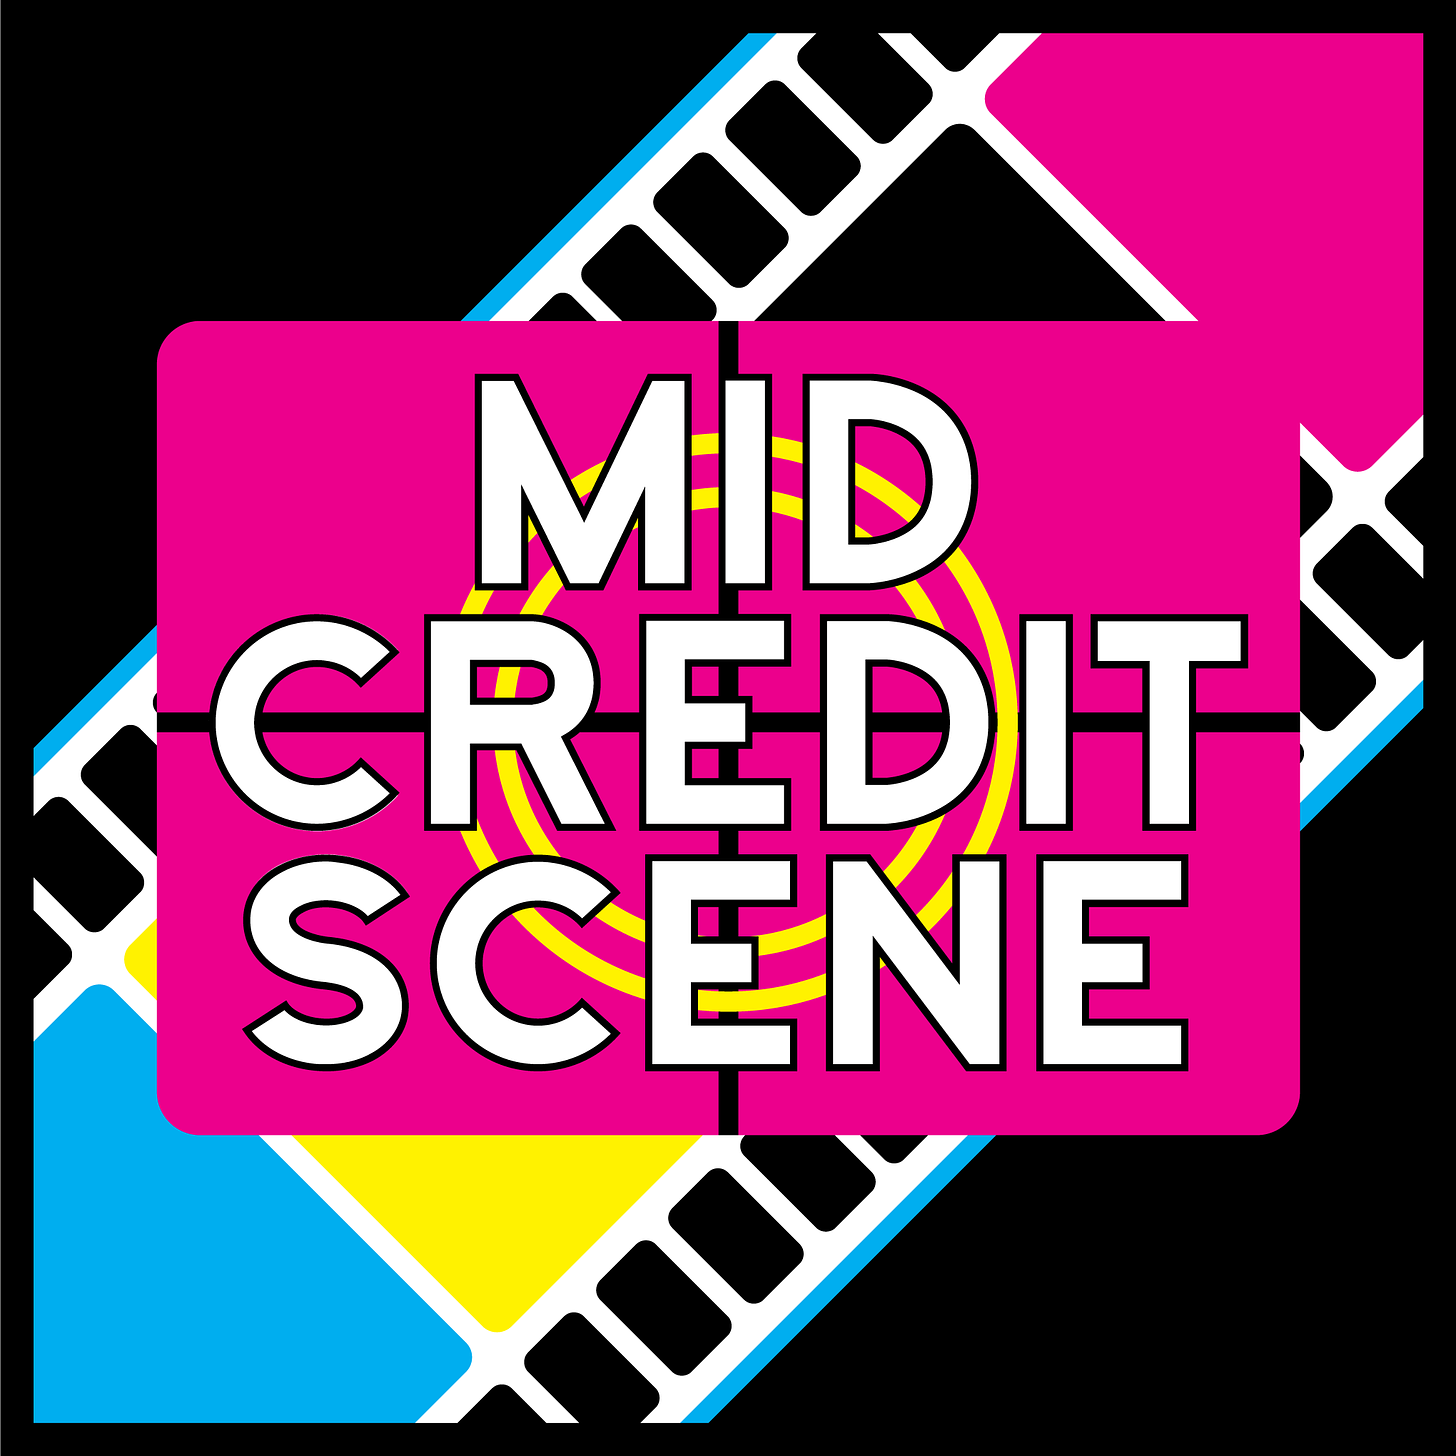 Mid-Credit Scene podcast on a hot pink background, in front of a yellow and blue film strip